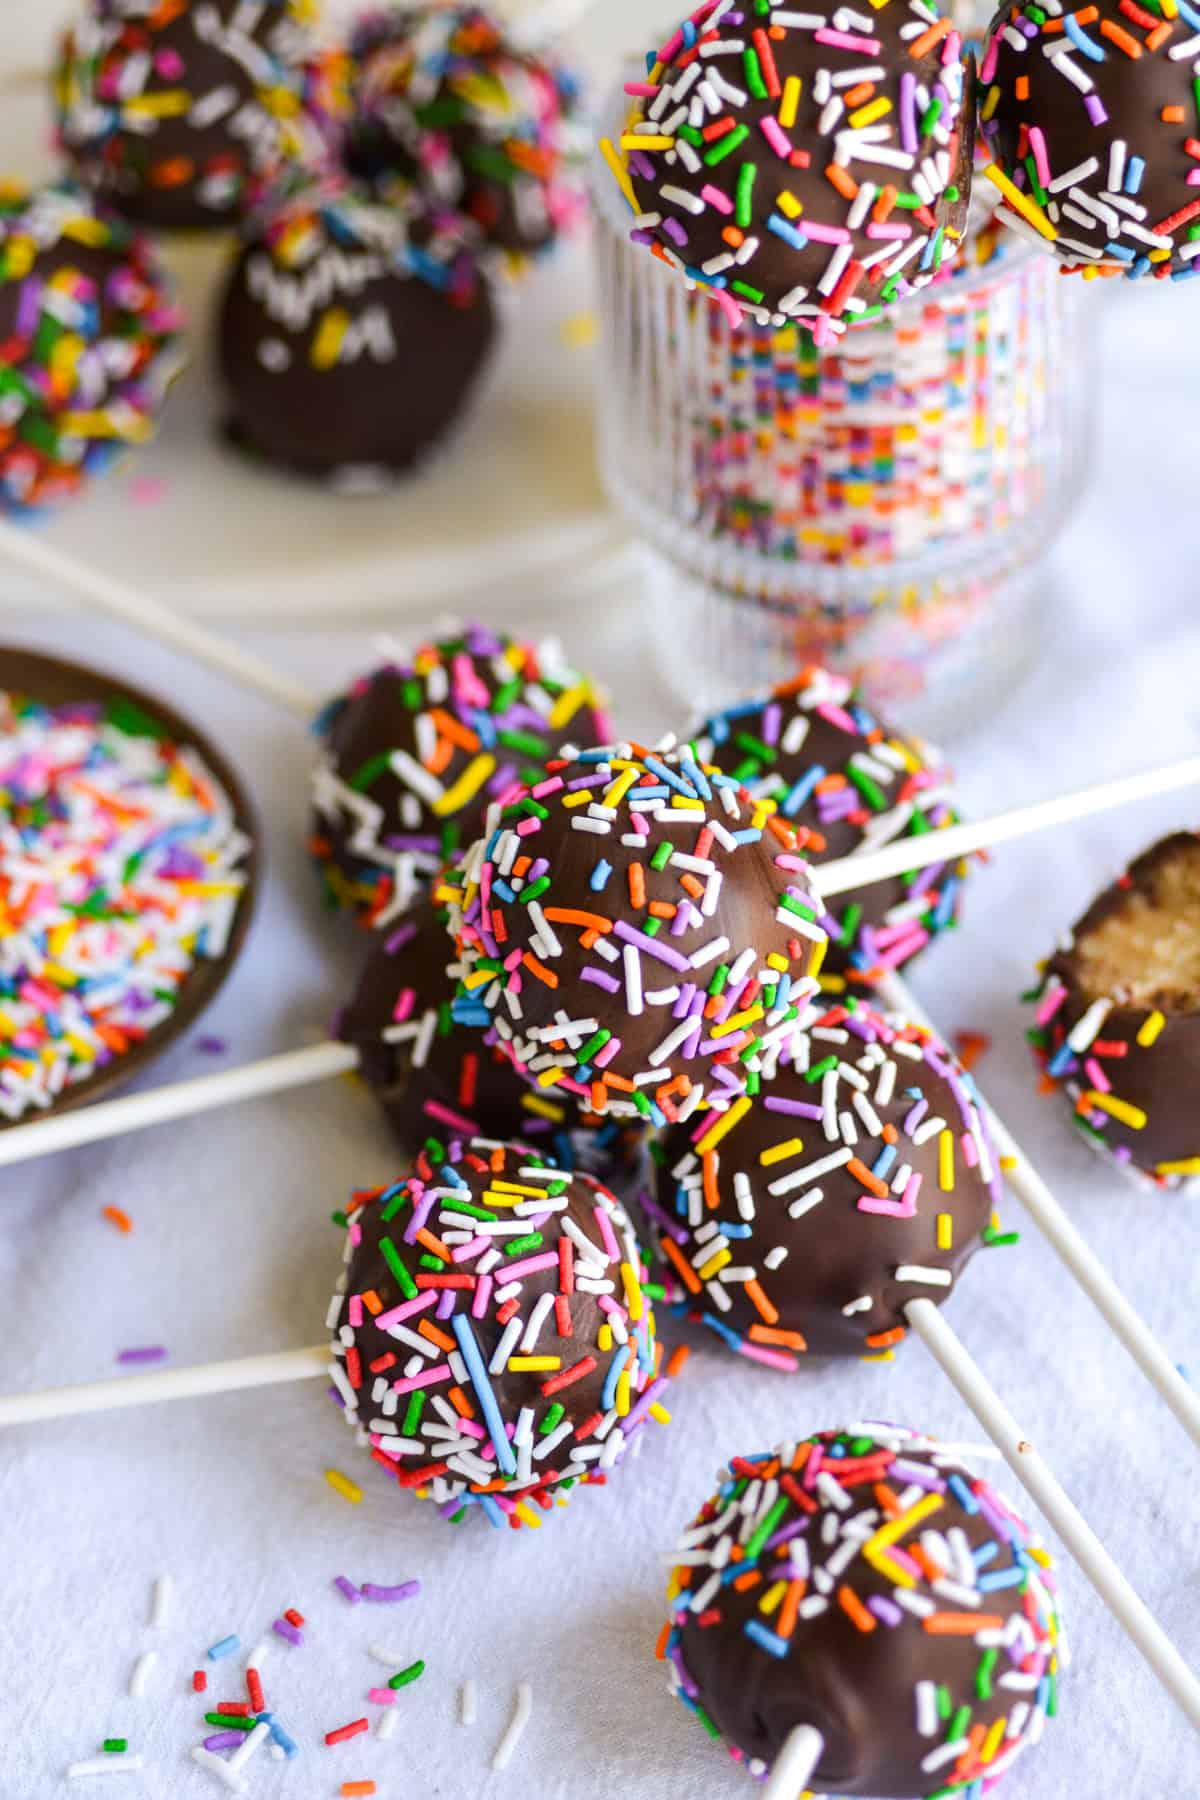 Vegan Cake pops dipped in chocolate and topped with rainbow sprinkles stacked on top of each other on a white cloth.